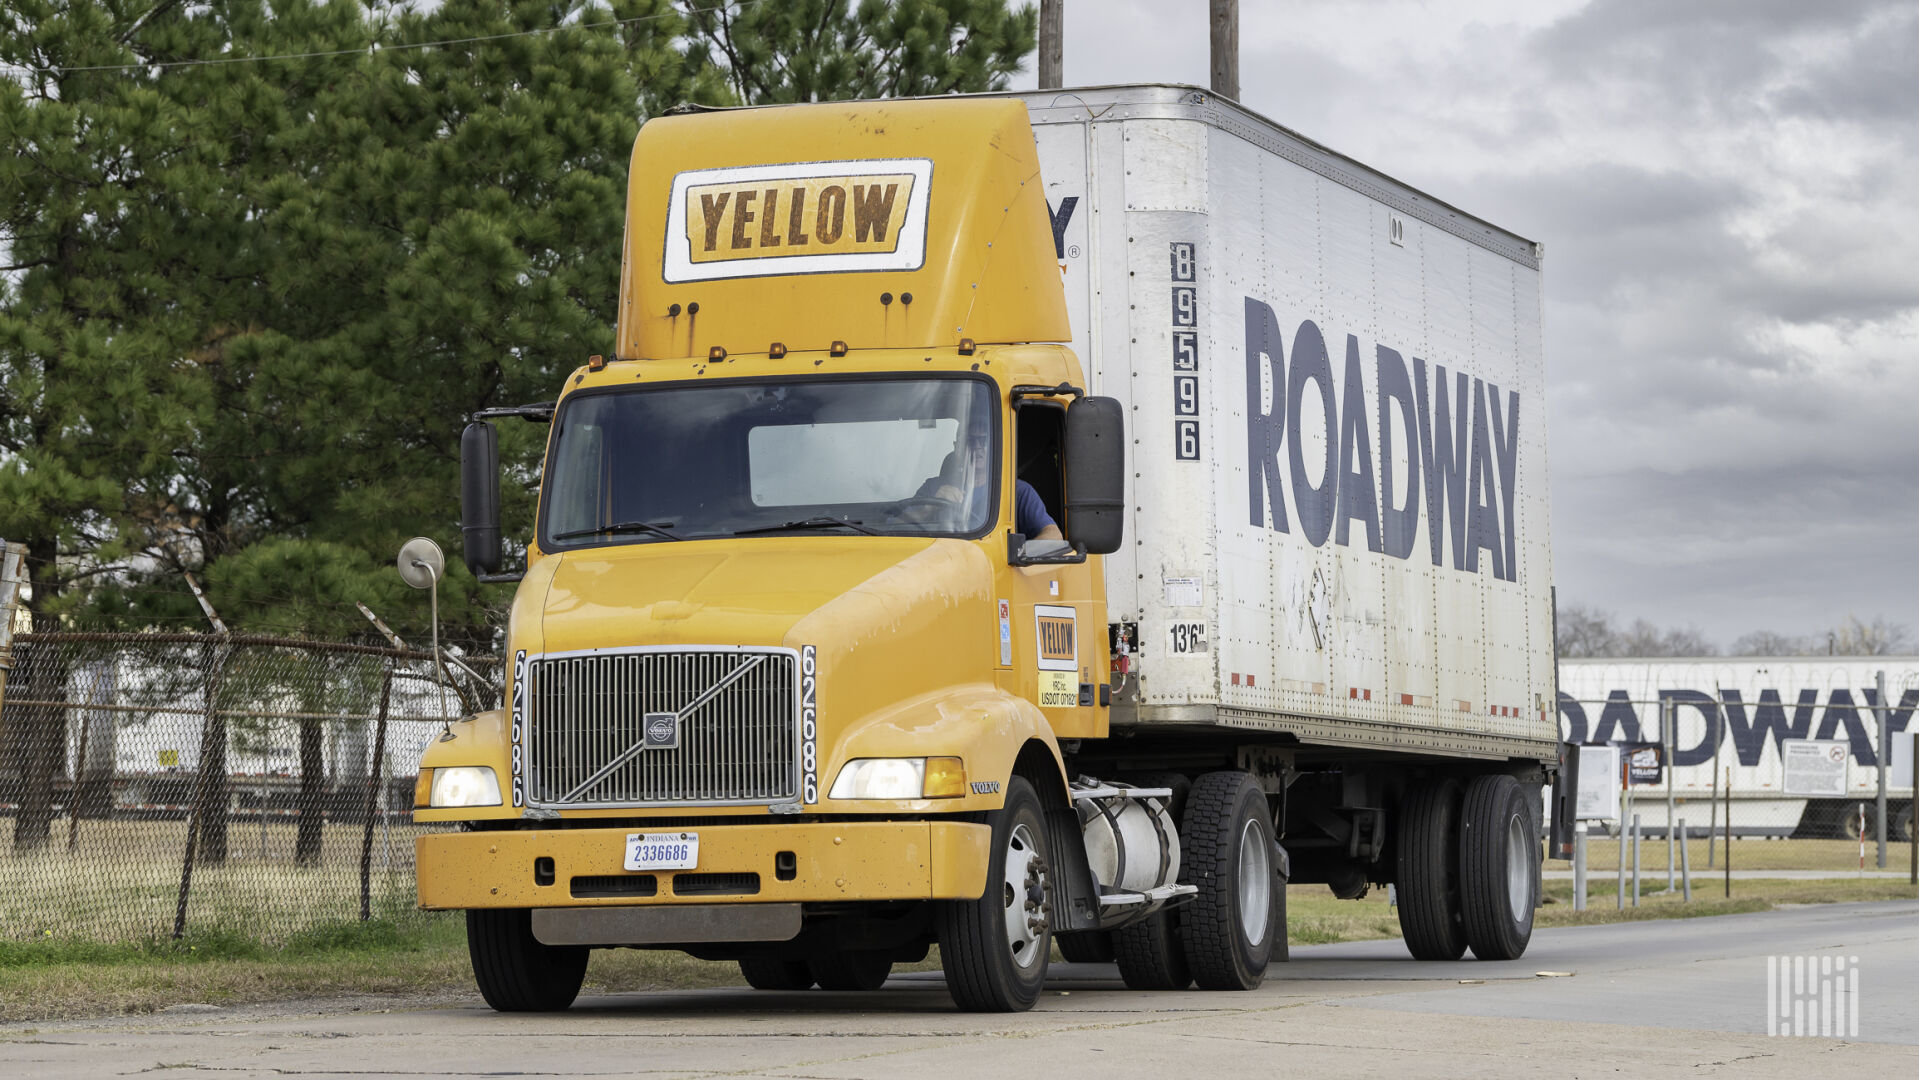 Yellow Freight bankrupt, closing its door State News mykxlg